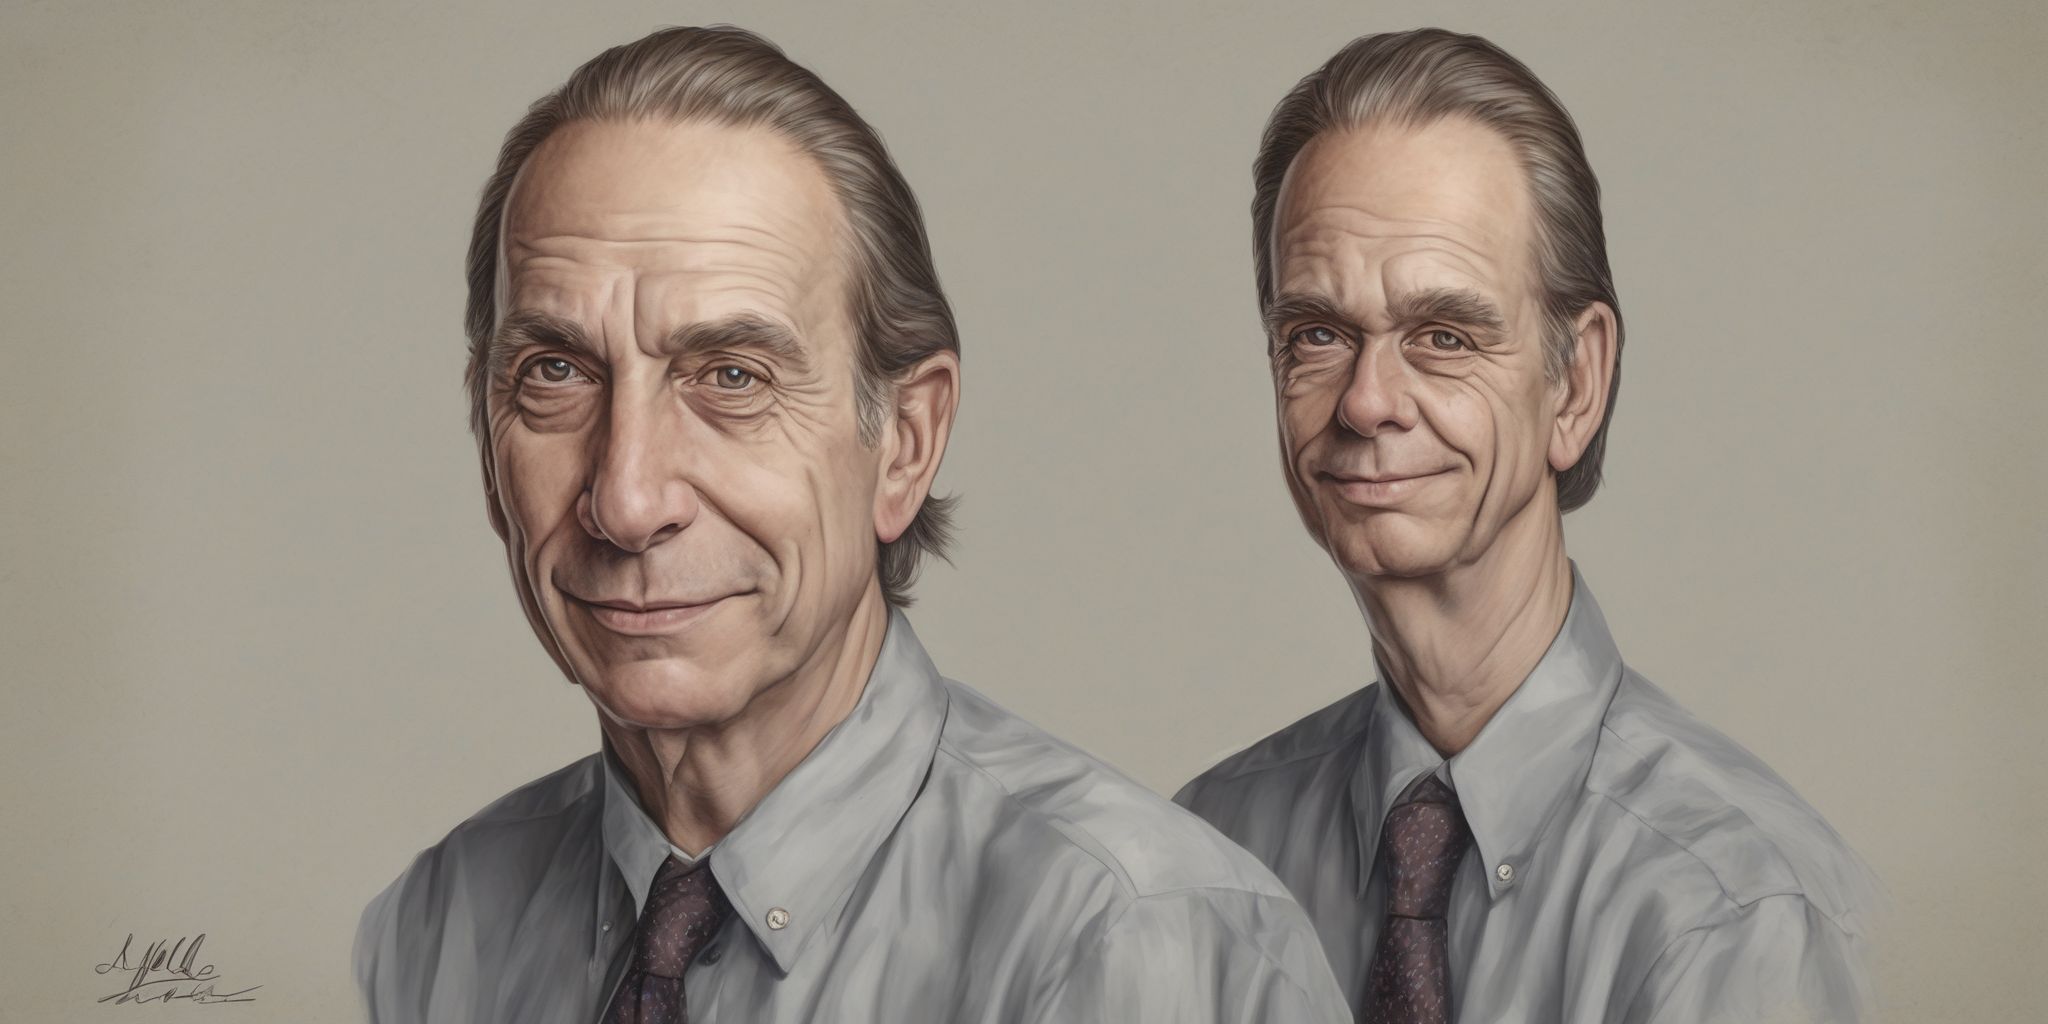 Teller  in realistic, photographic style